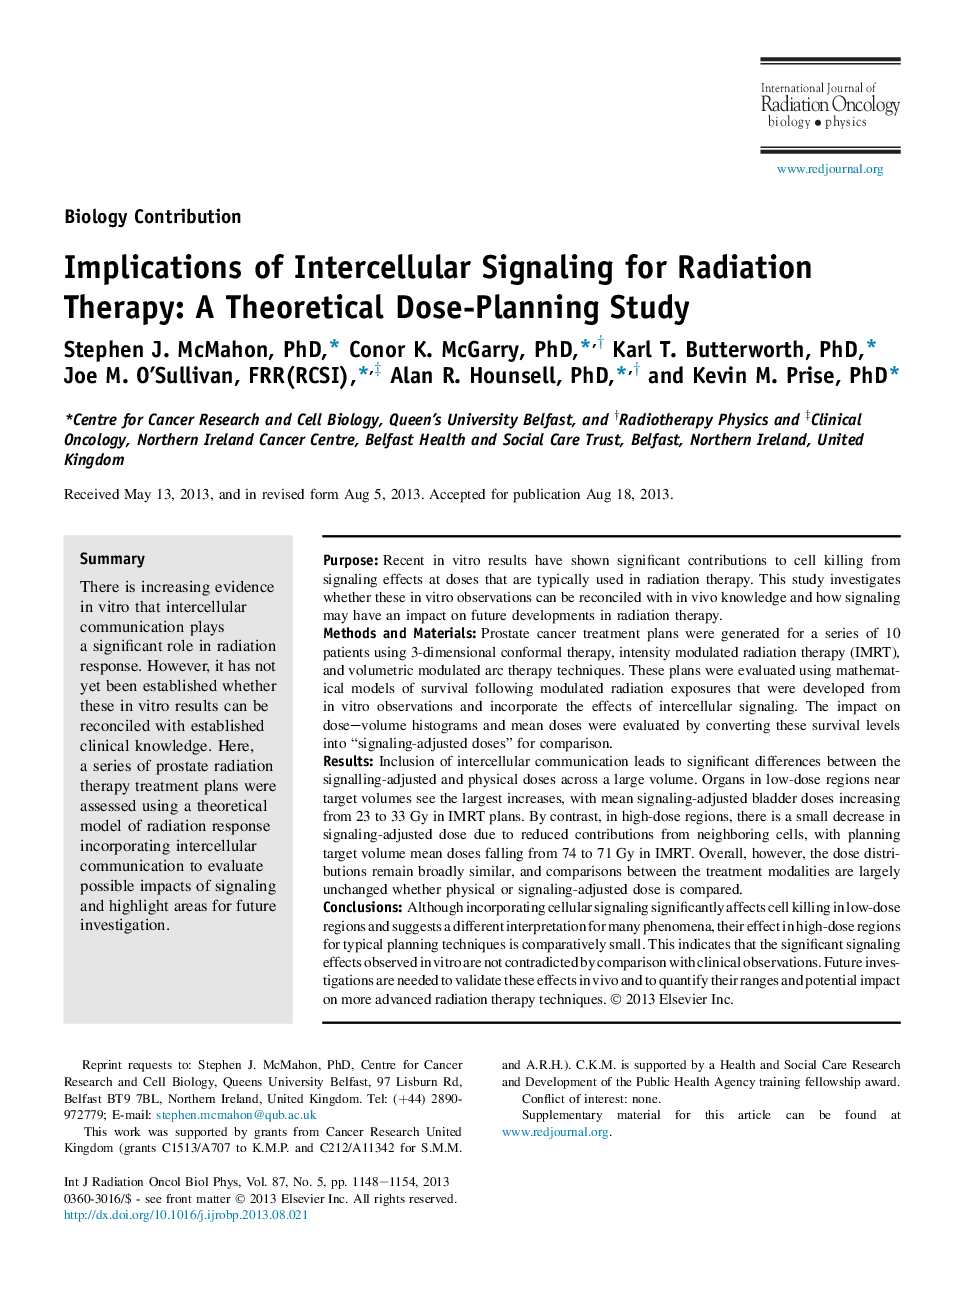 Implications of Intercellular Signaling for Radiation Therapy: A Theoretical Dose-Planning Study